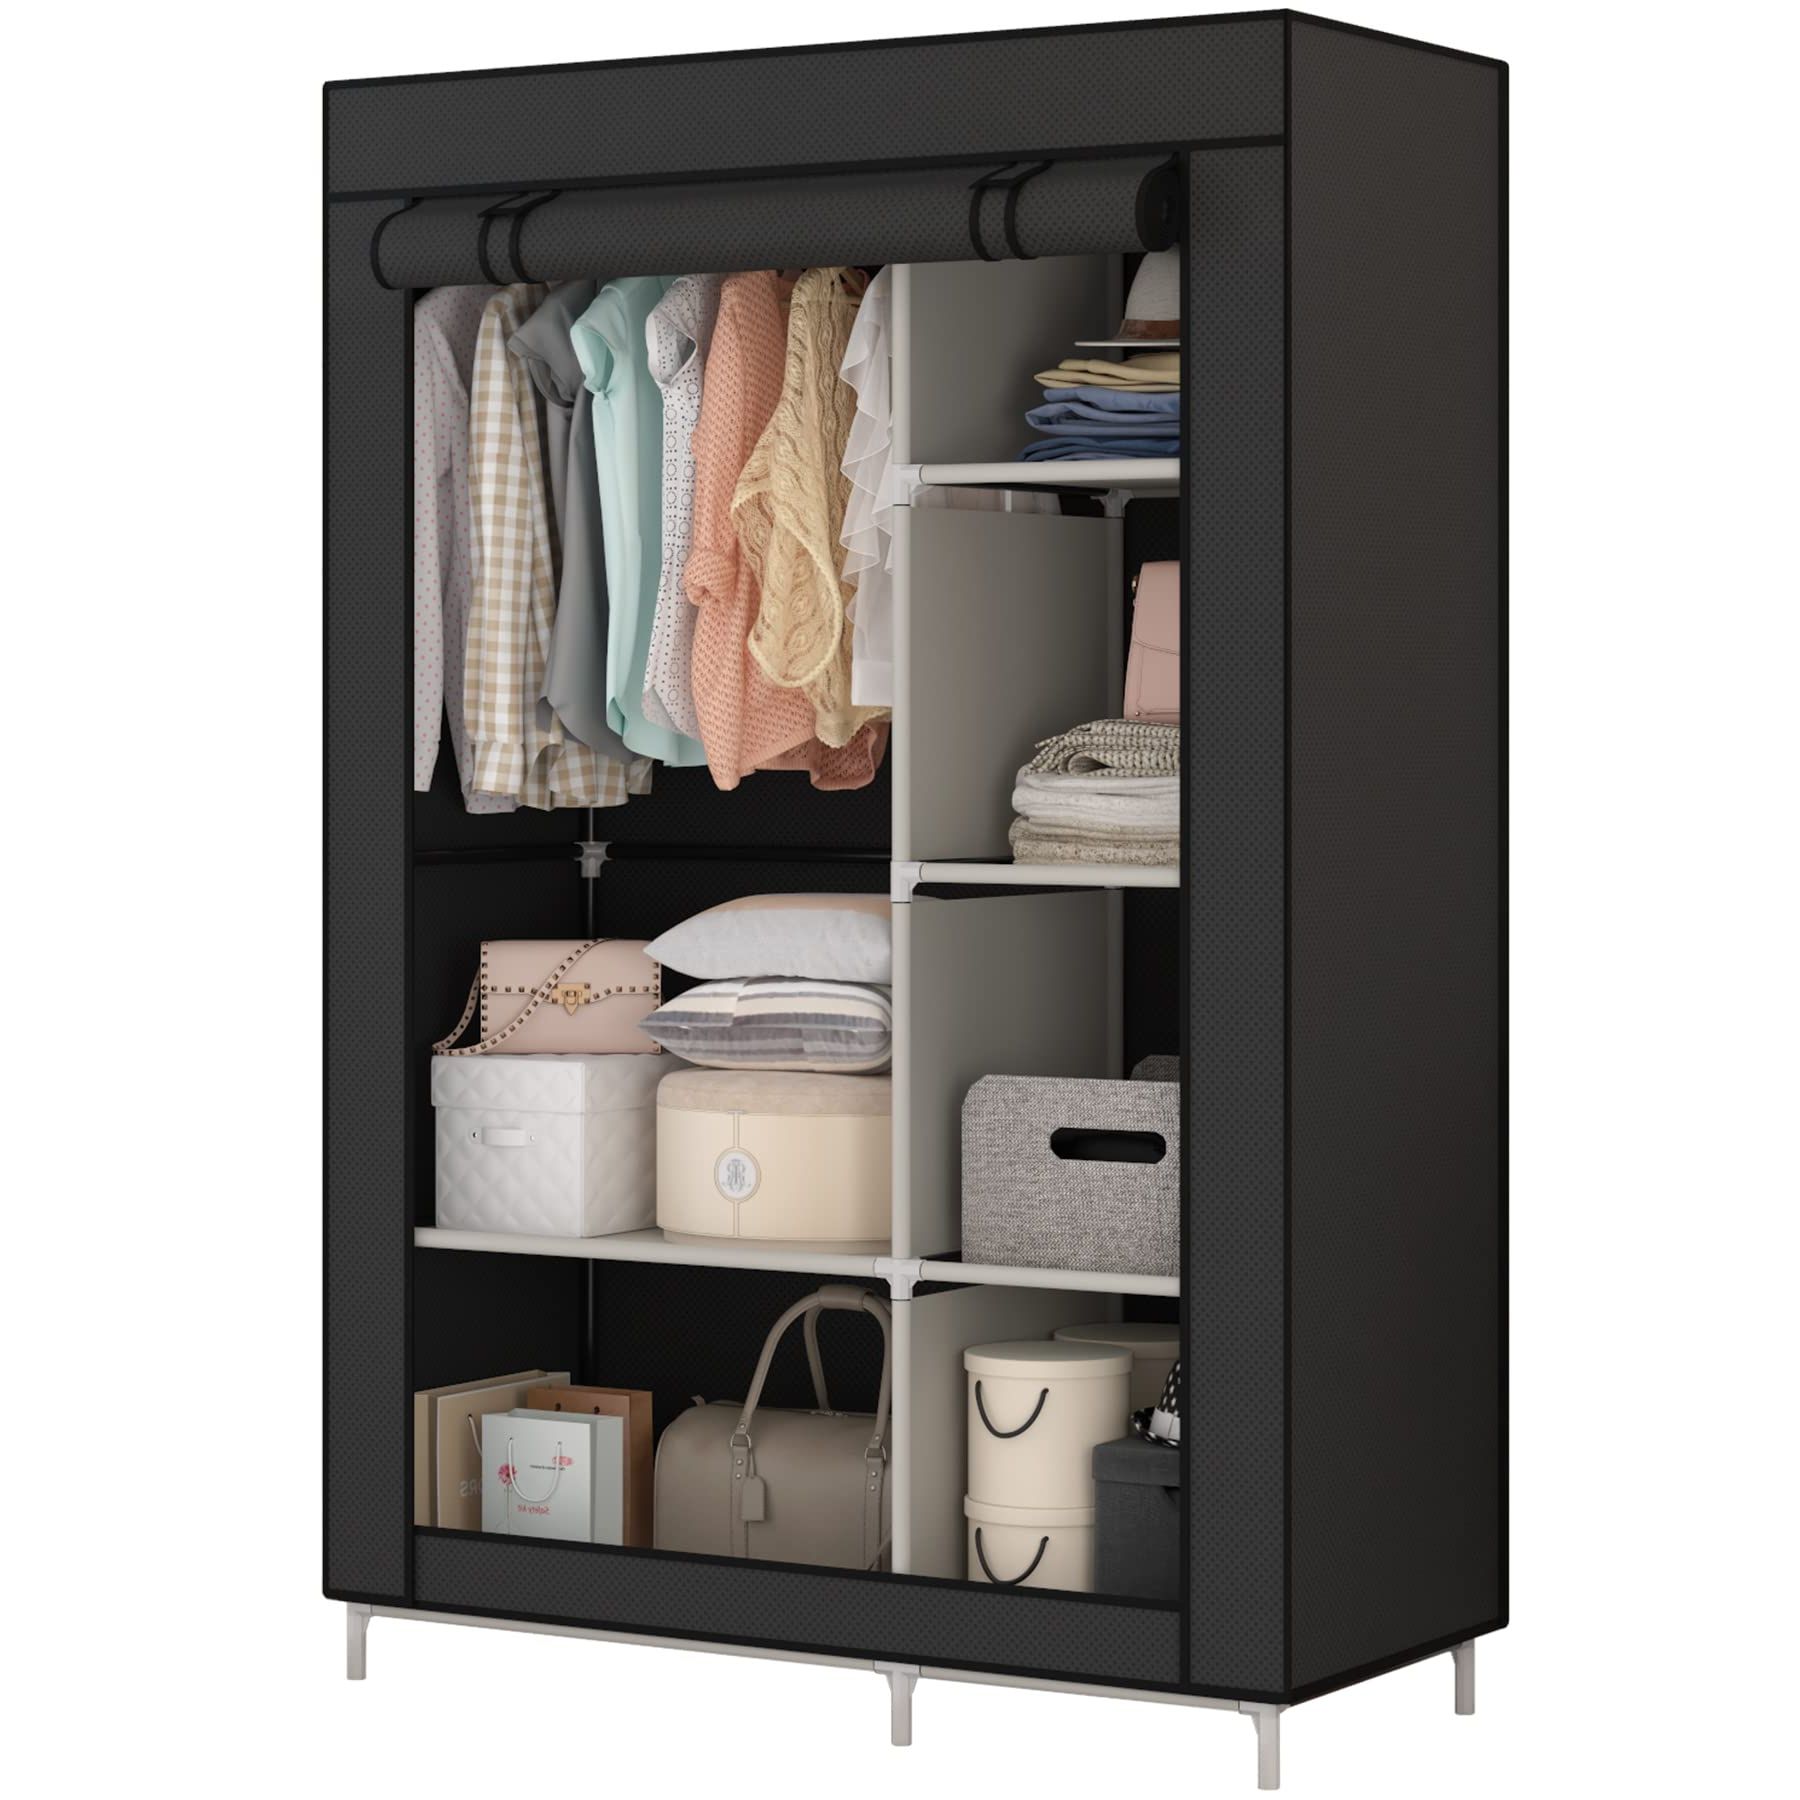 Latest Amazon: Calmootey Closet Storage Organizer,portable Wardrobe With 6  Shelves And Clothes Rod,non Woven Fabric Cover With 4 Side Pockets,black :  Home & Kitchen For 6 Shelf Non Woven Wardrobes (View 2 of 10)